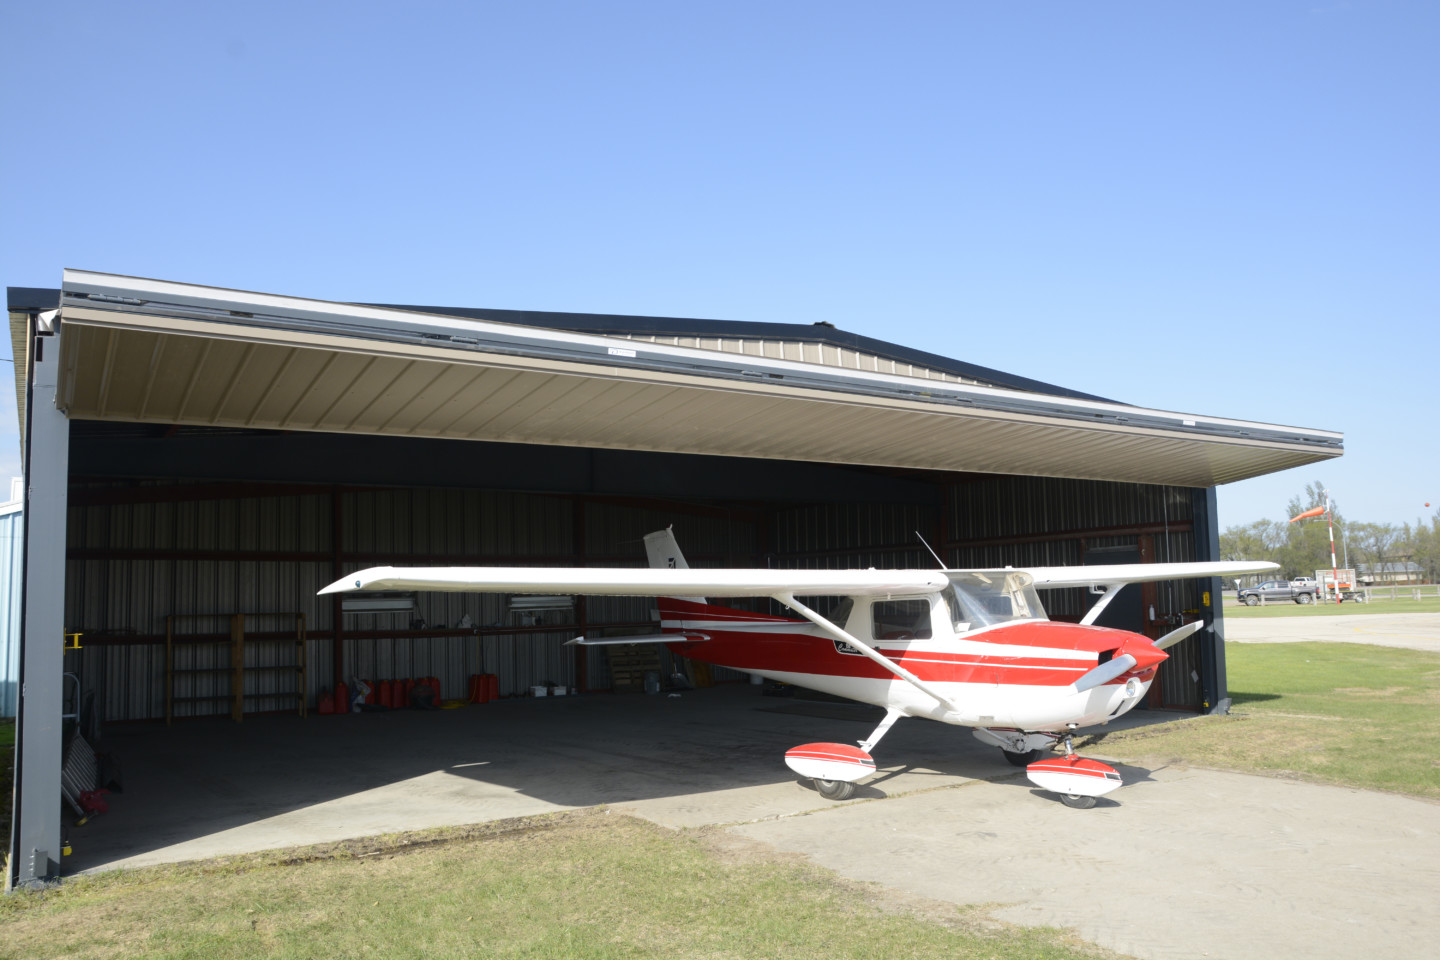 5 Things to consider when looking for a hangar door.